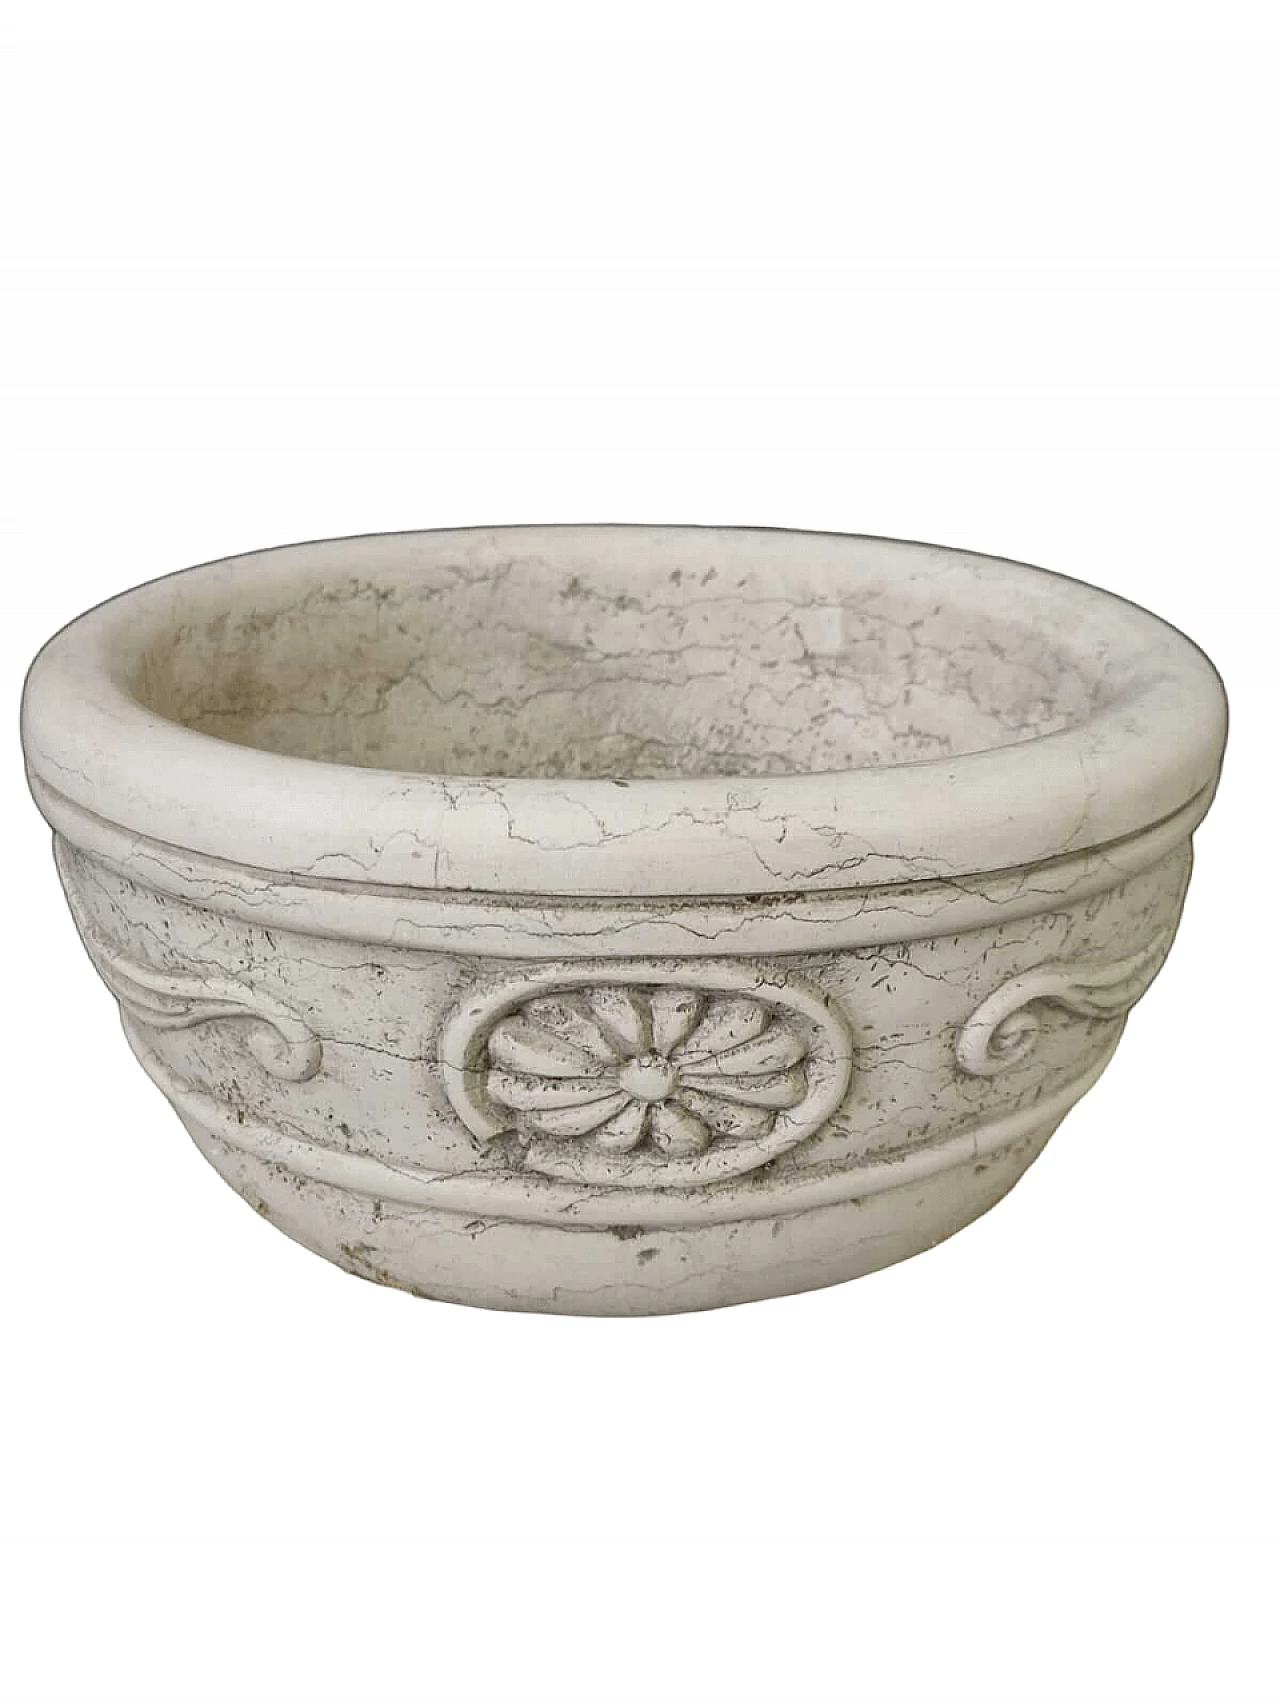 Asiago Biancone marble apothecary mortar, late 19th century 6